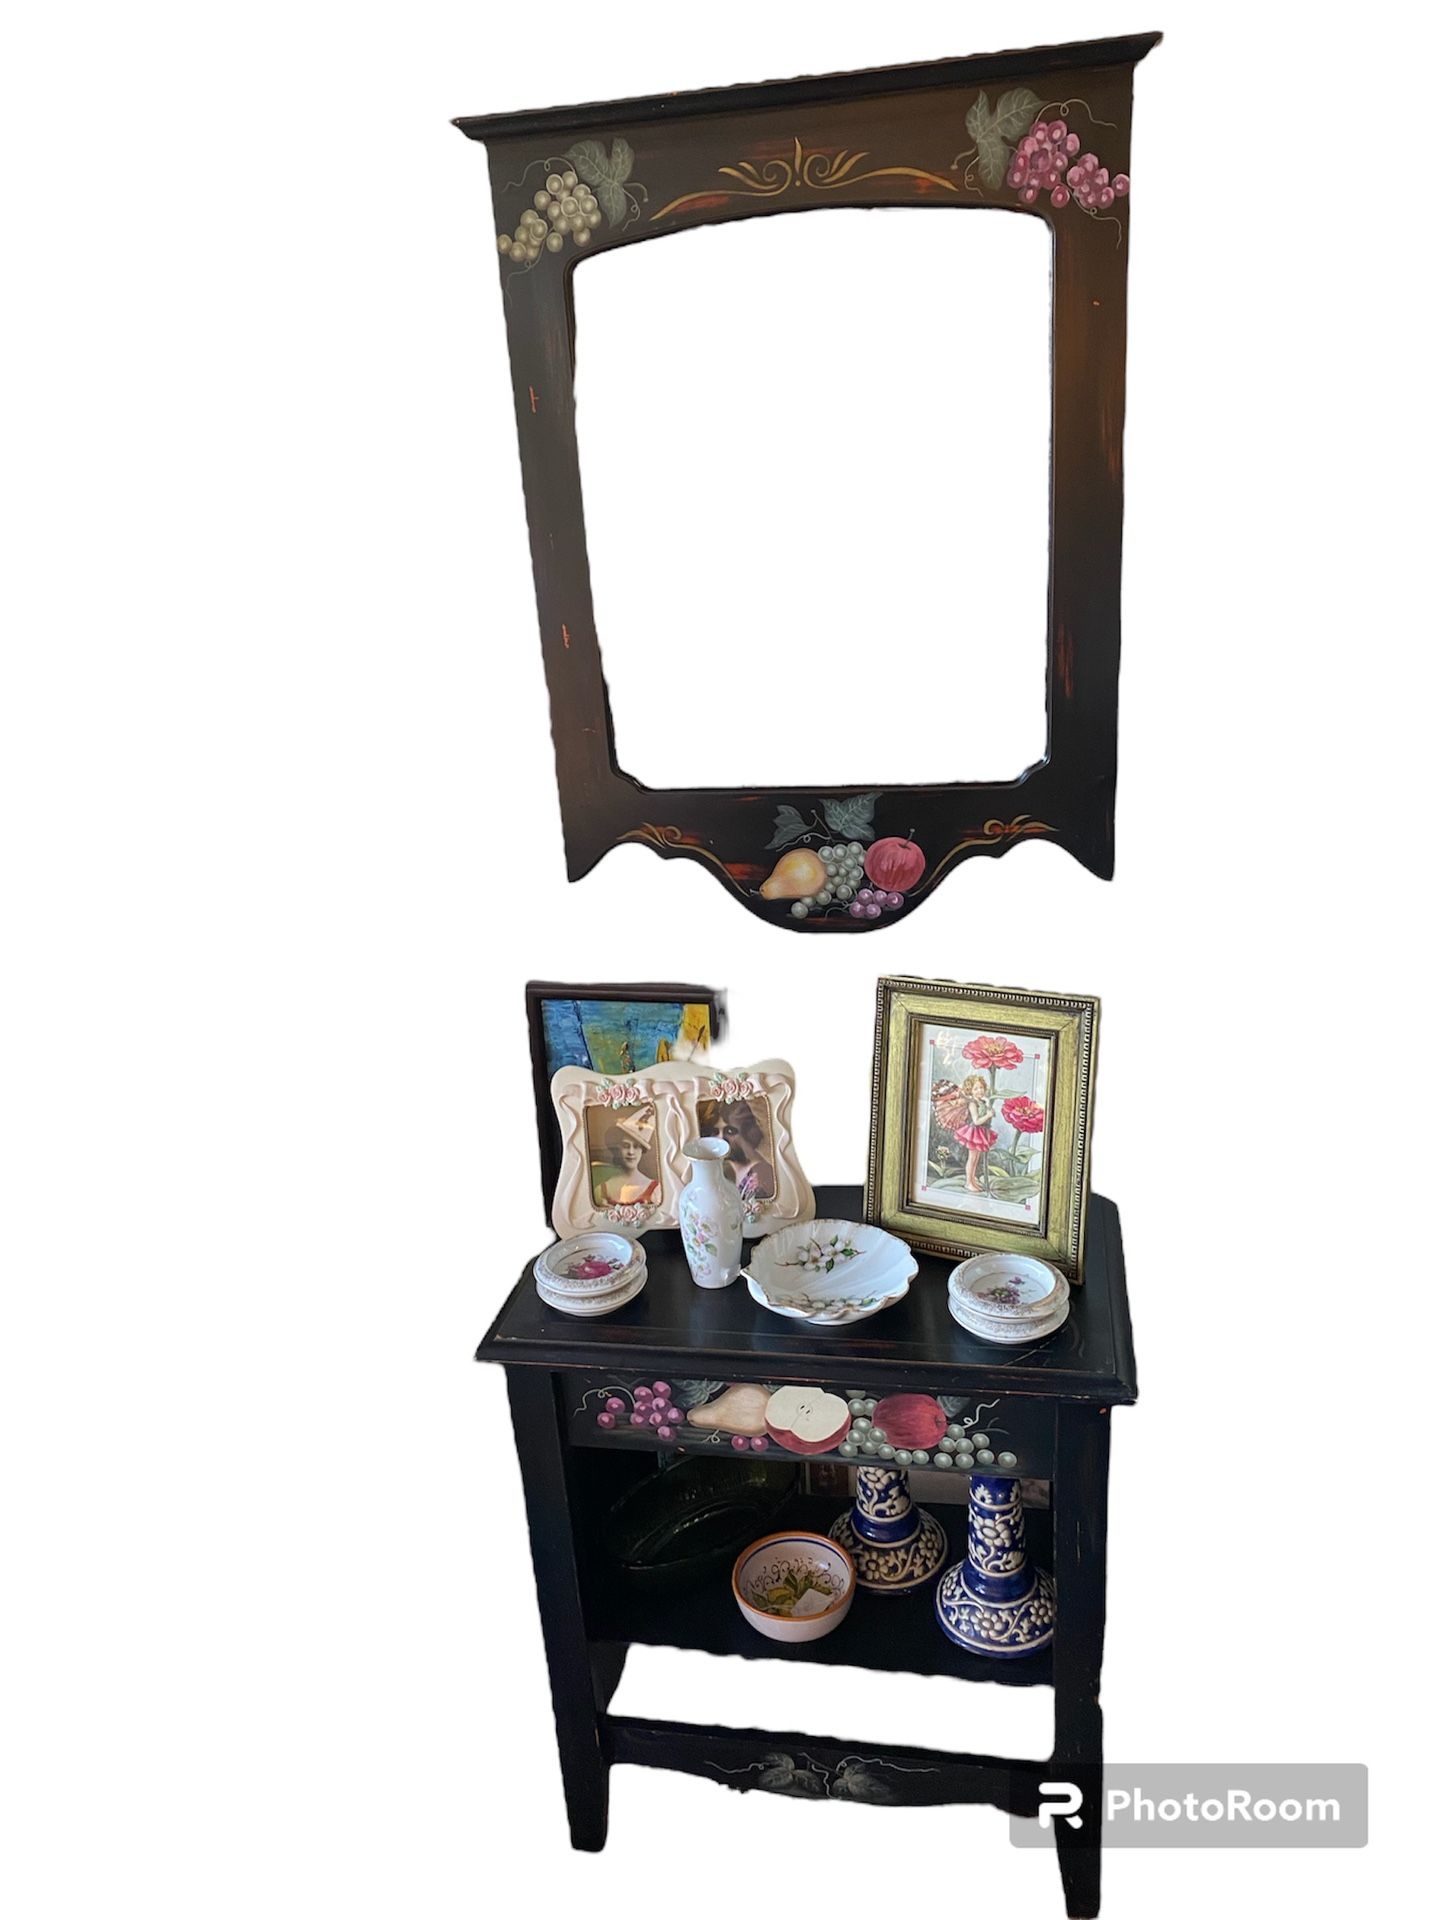 Vintage painted fruit Italian cottage rustic style small table with mirror set